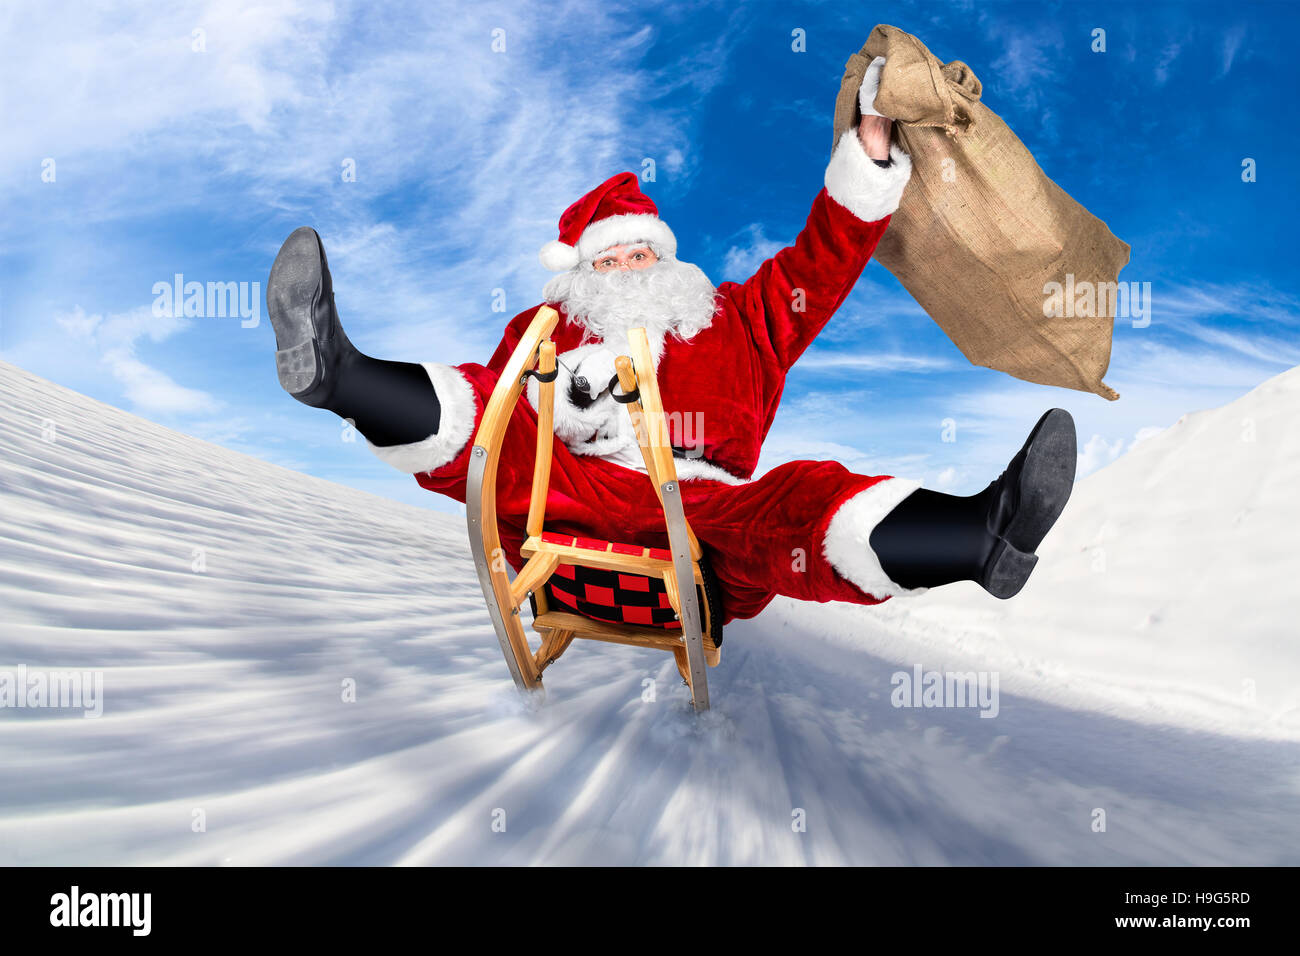 crazy santa claus on his sleigh hilarious fast funny crazy xmas christmas gift present delivery blue sky background Stock Photo